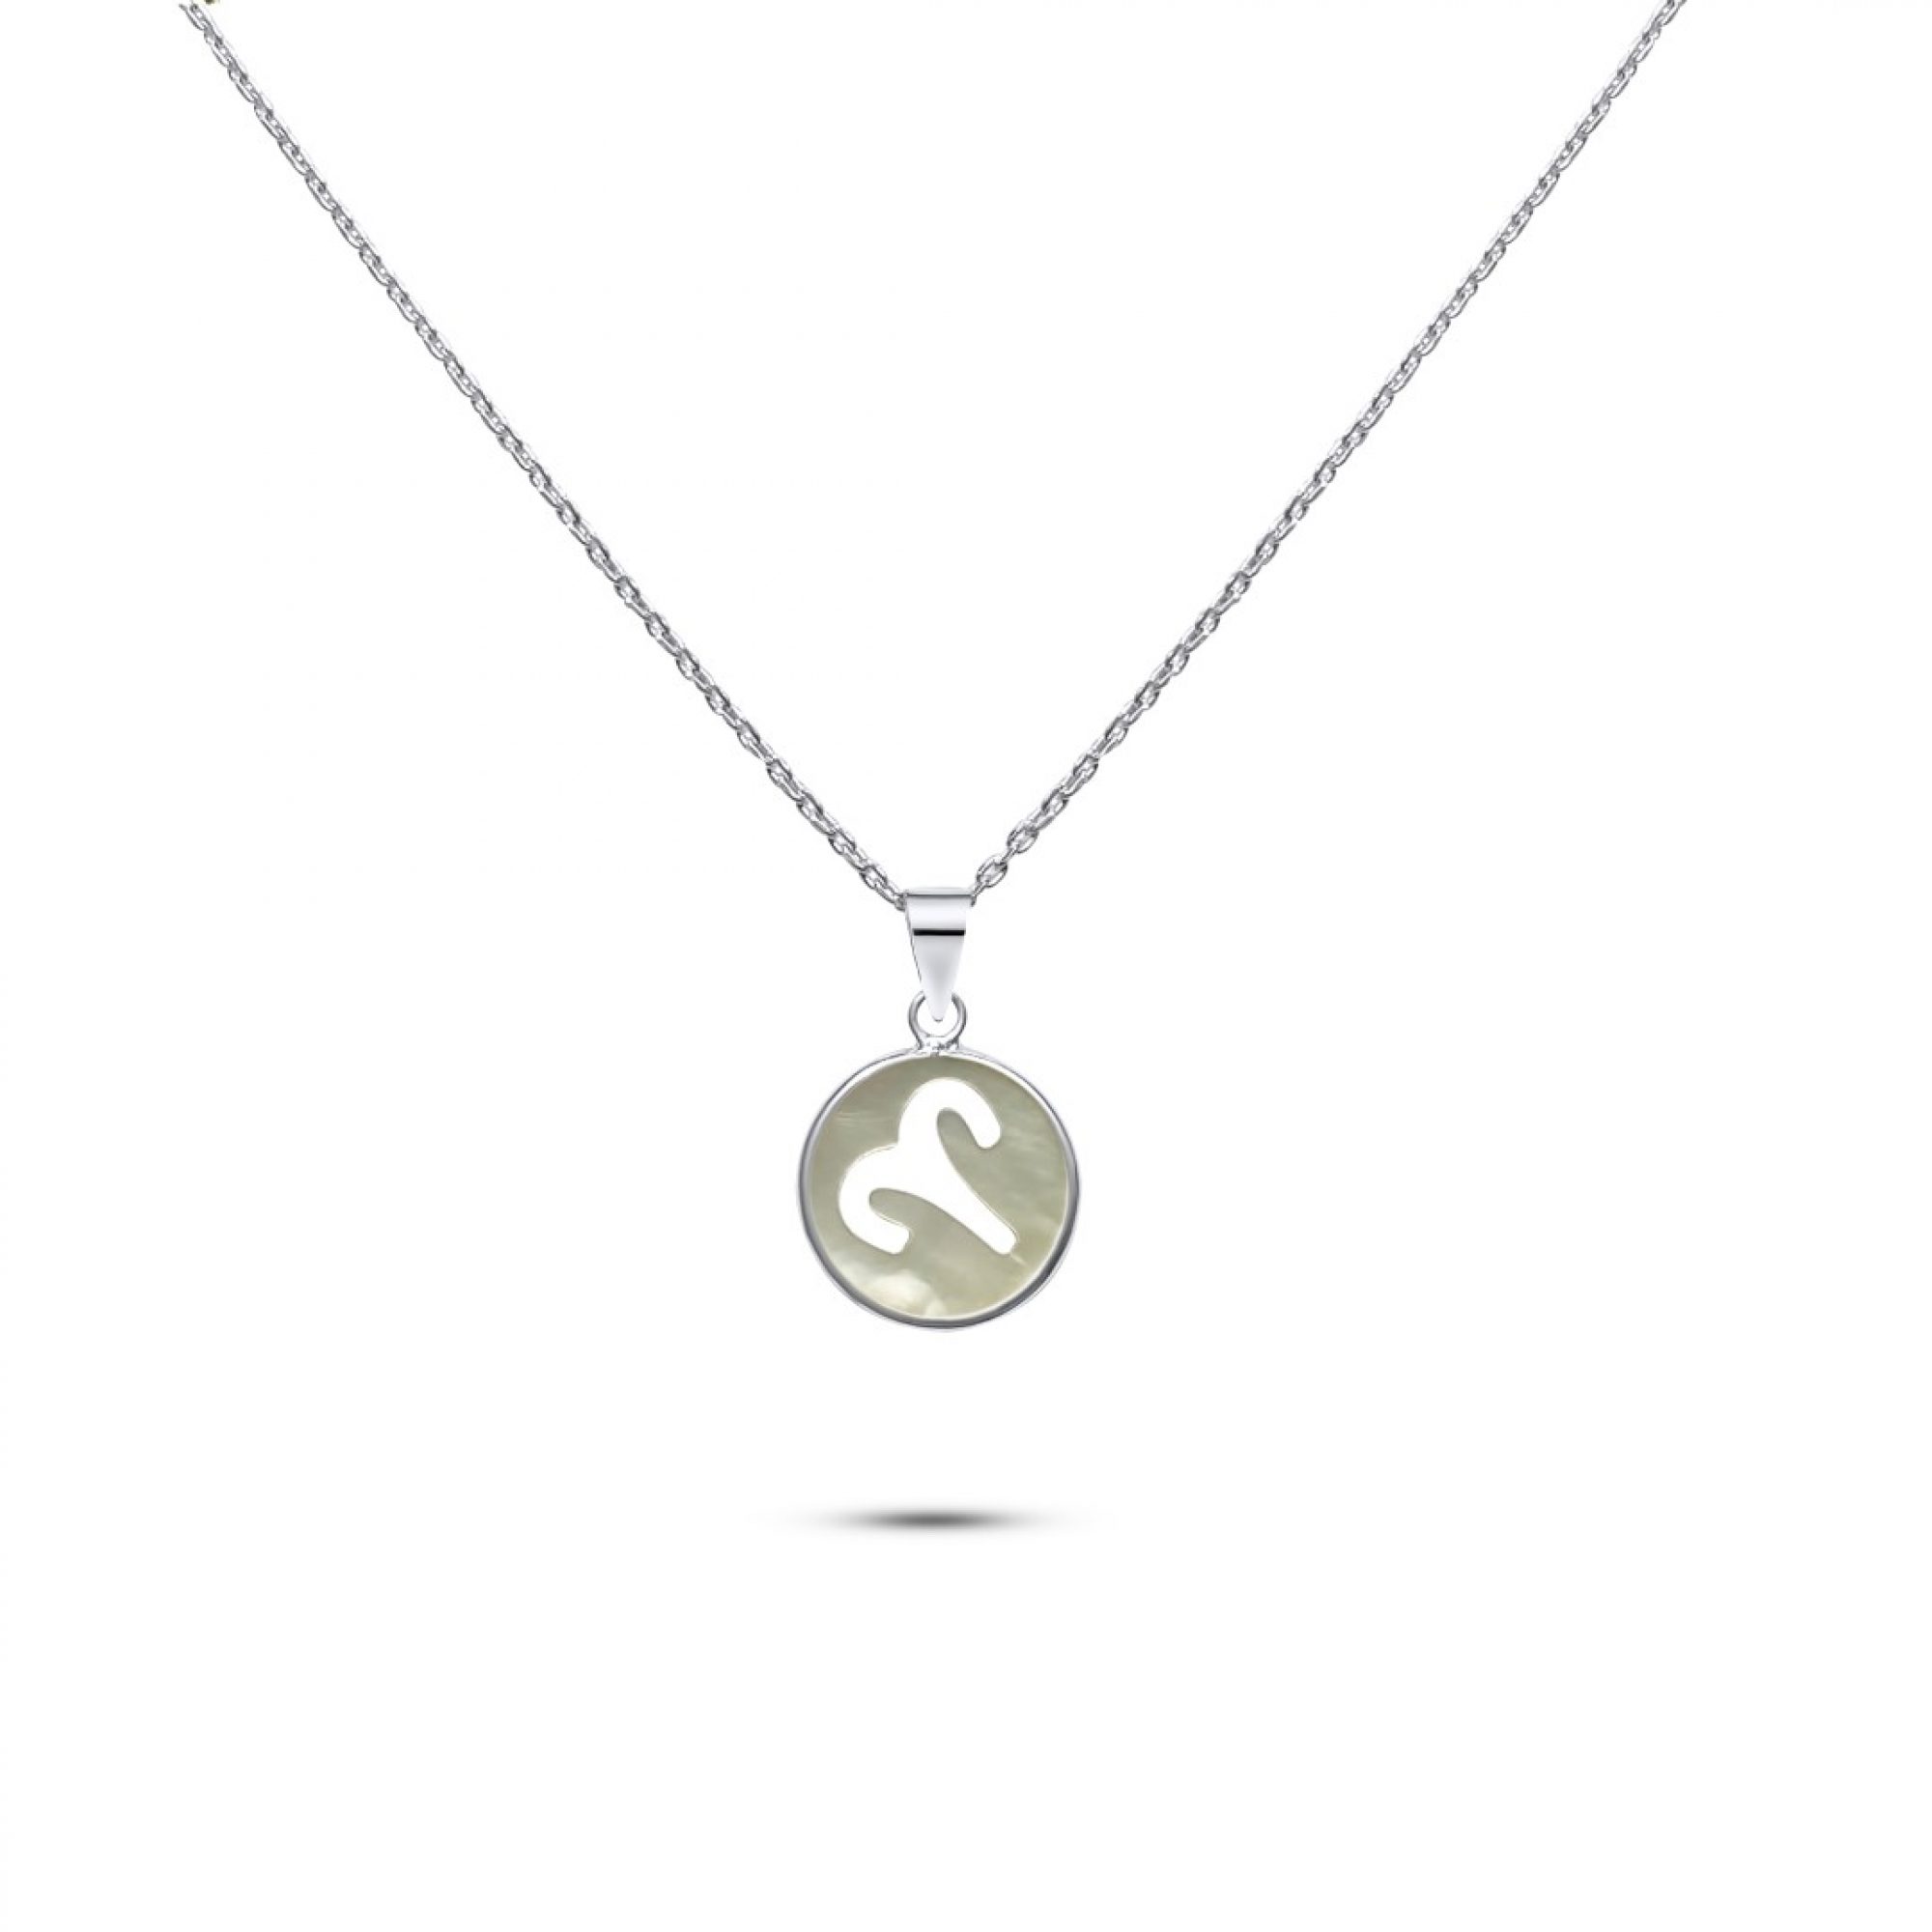 Aries sign necklace with mother of pearl